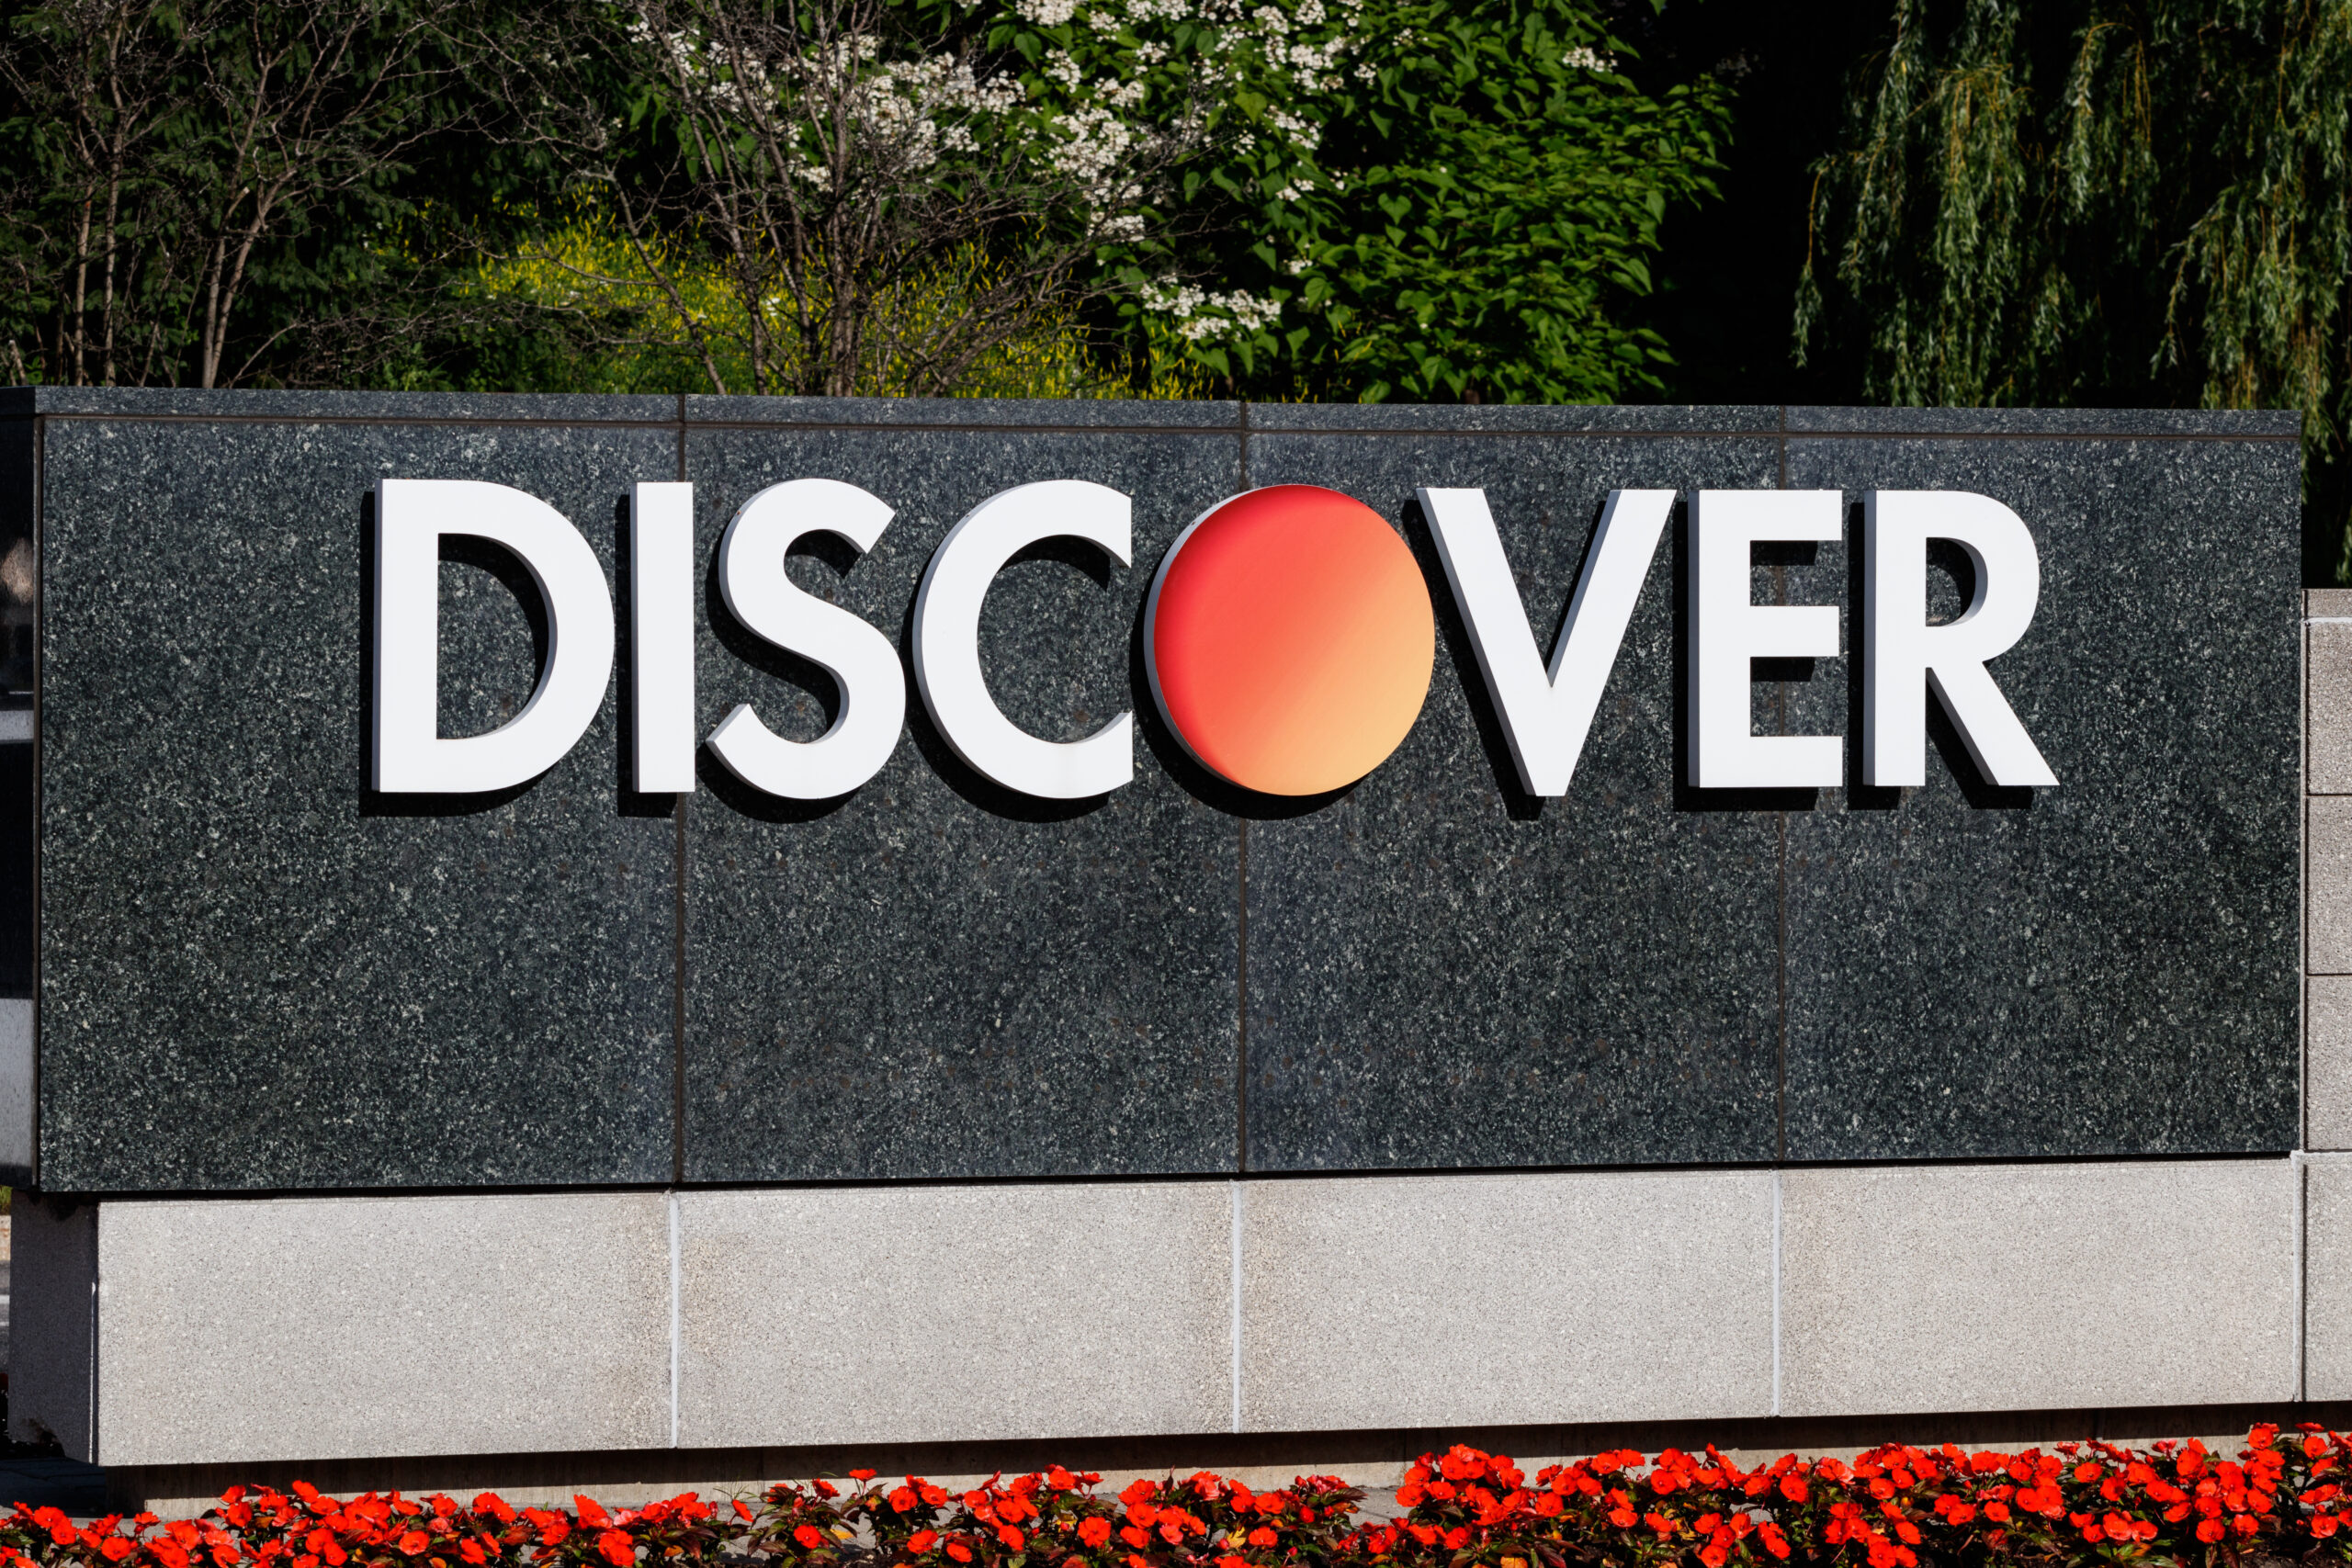 Riverwoods - Circa June 2019: Discover Financial Services headquarters. Discover offers credit cards, home and student loans I